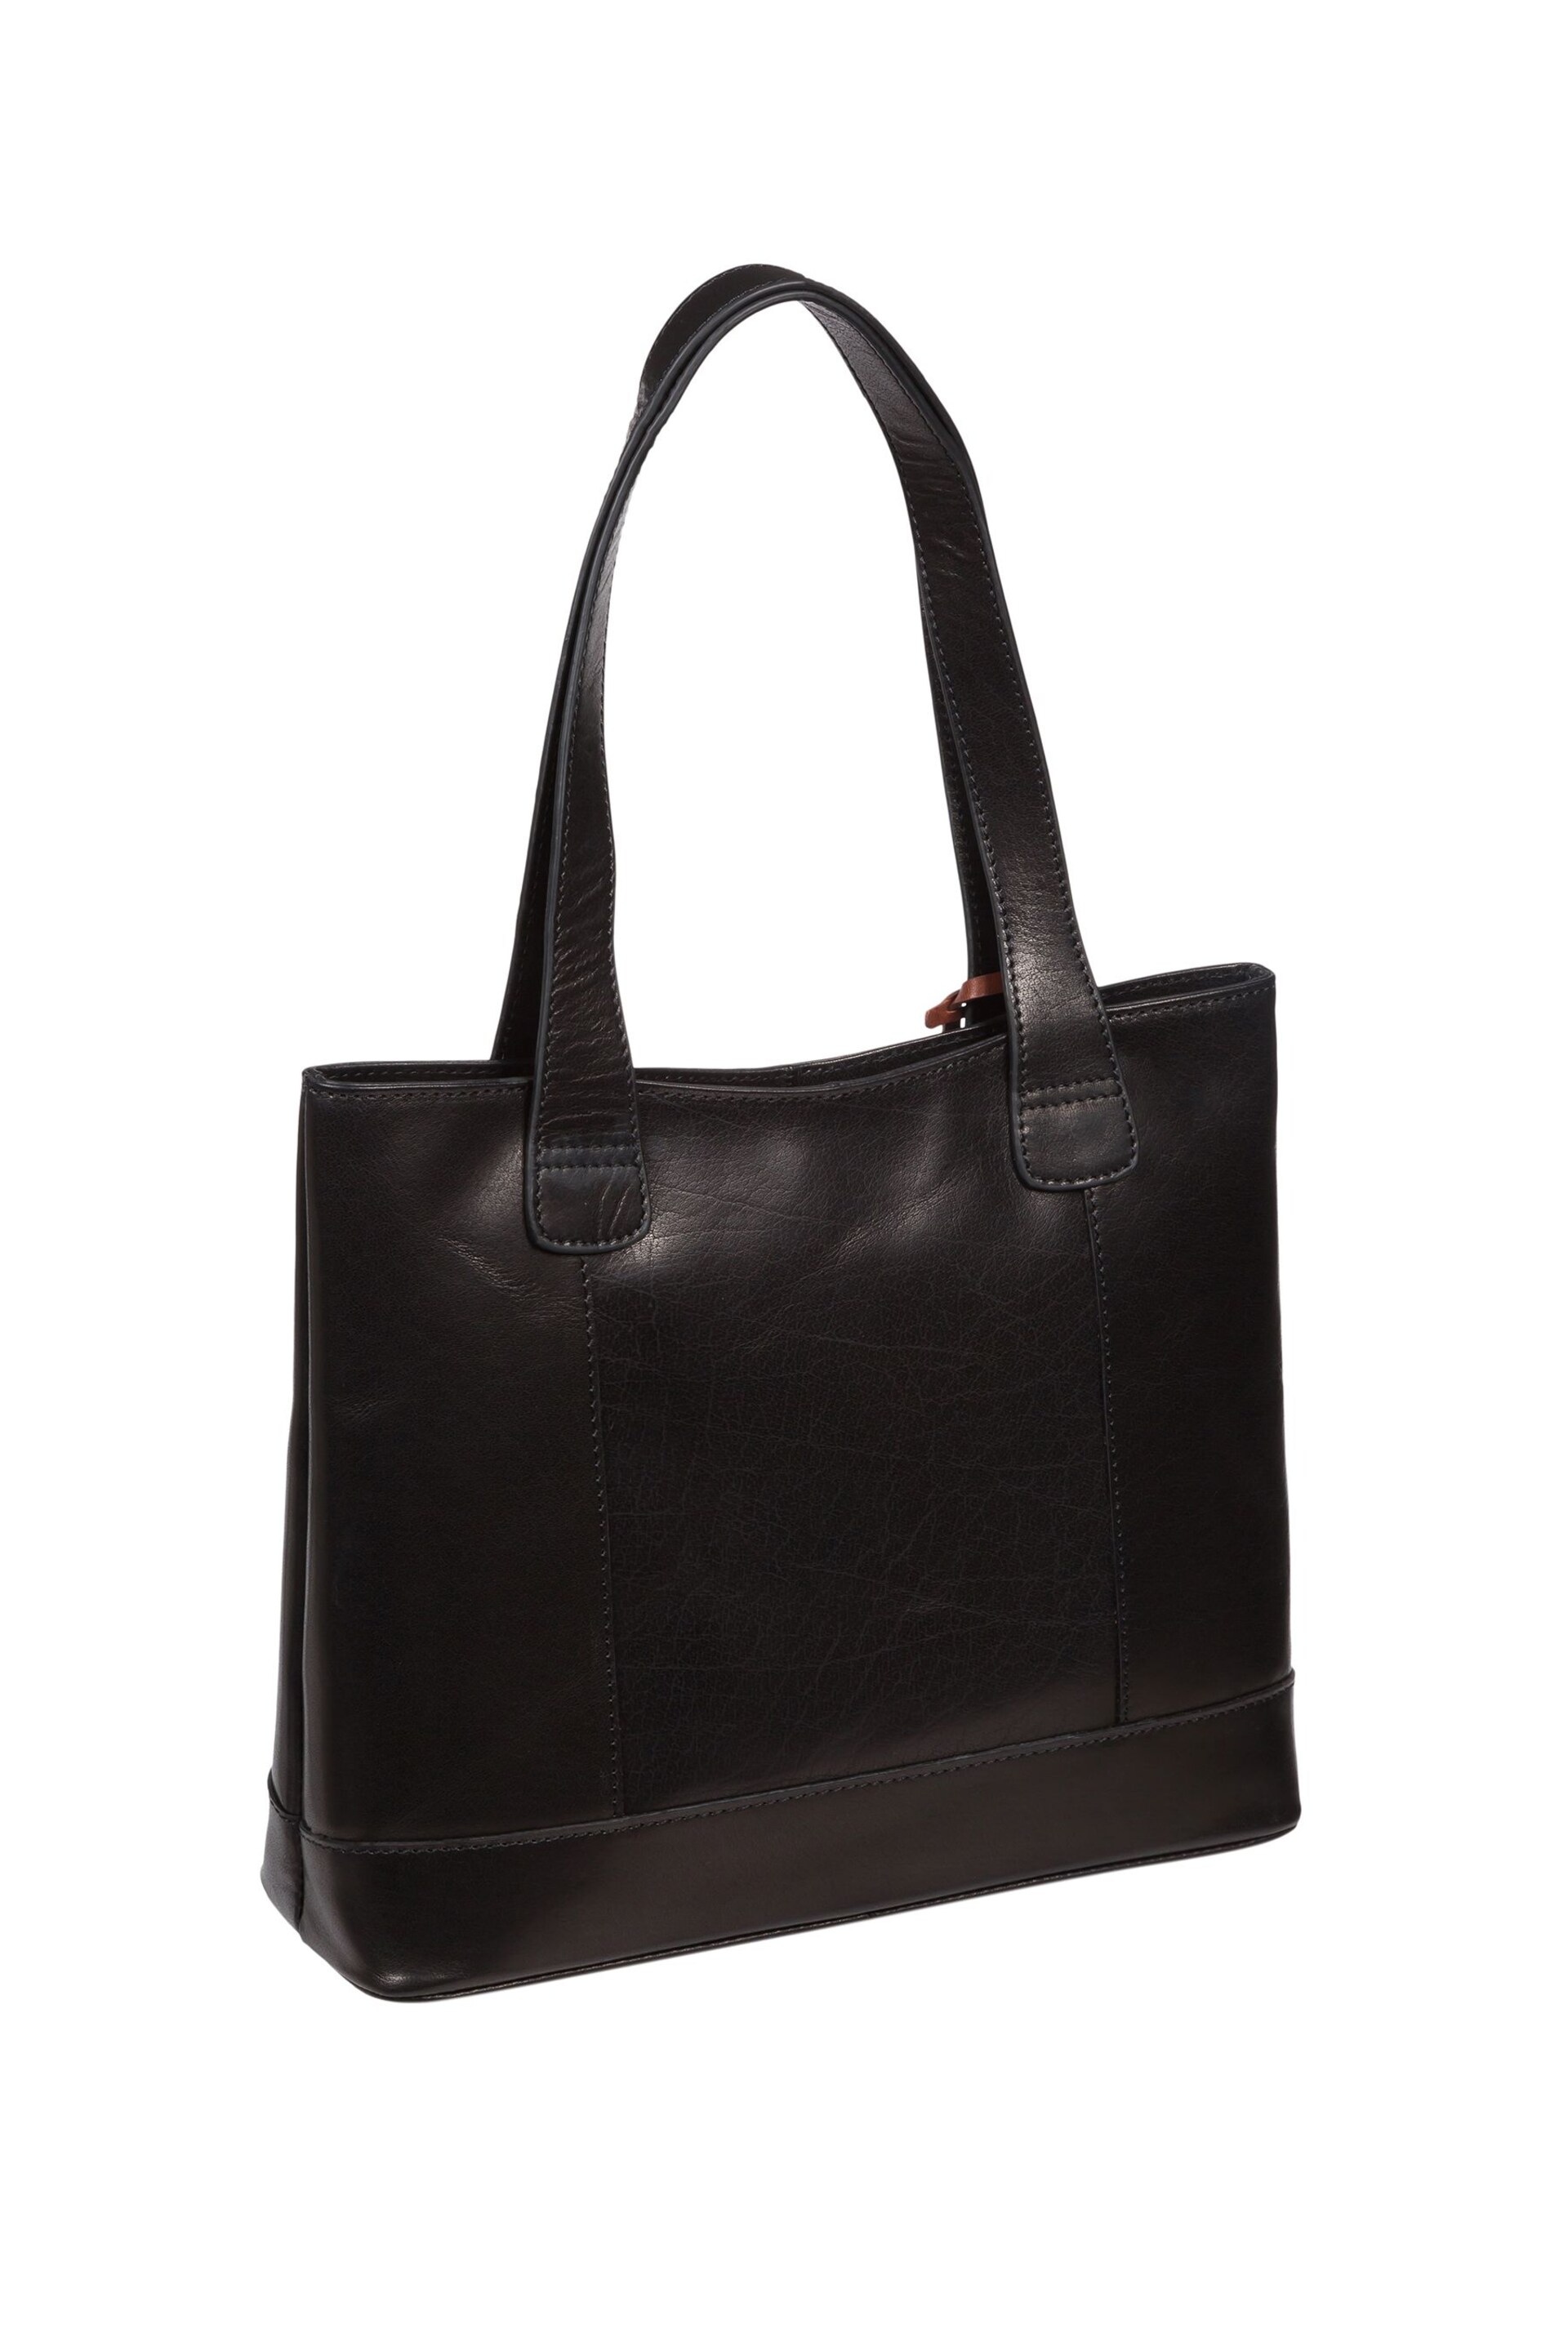 Conkca Little Patience Leather Tote Bag - Image 3 of 6